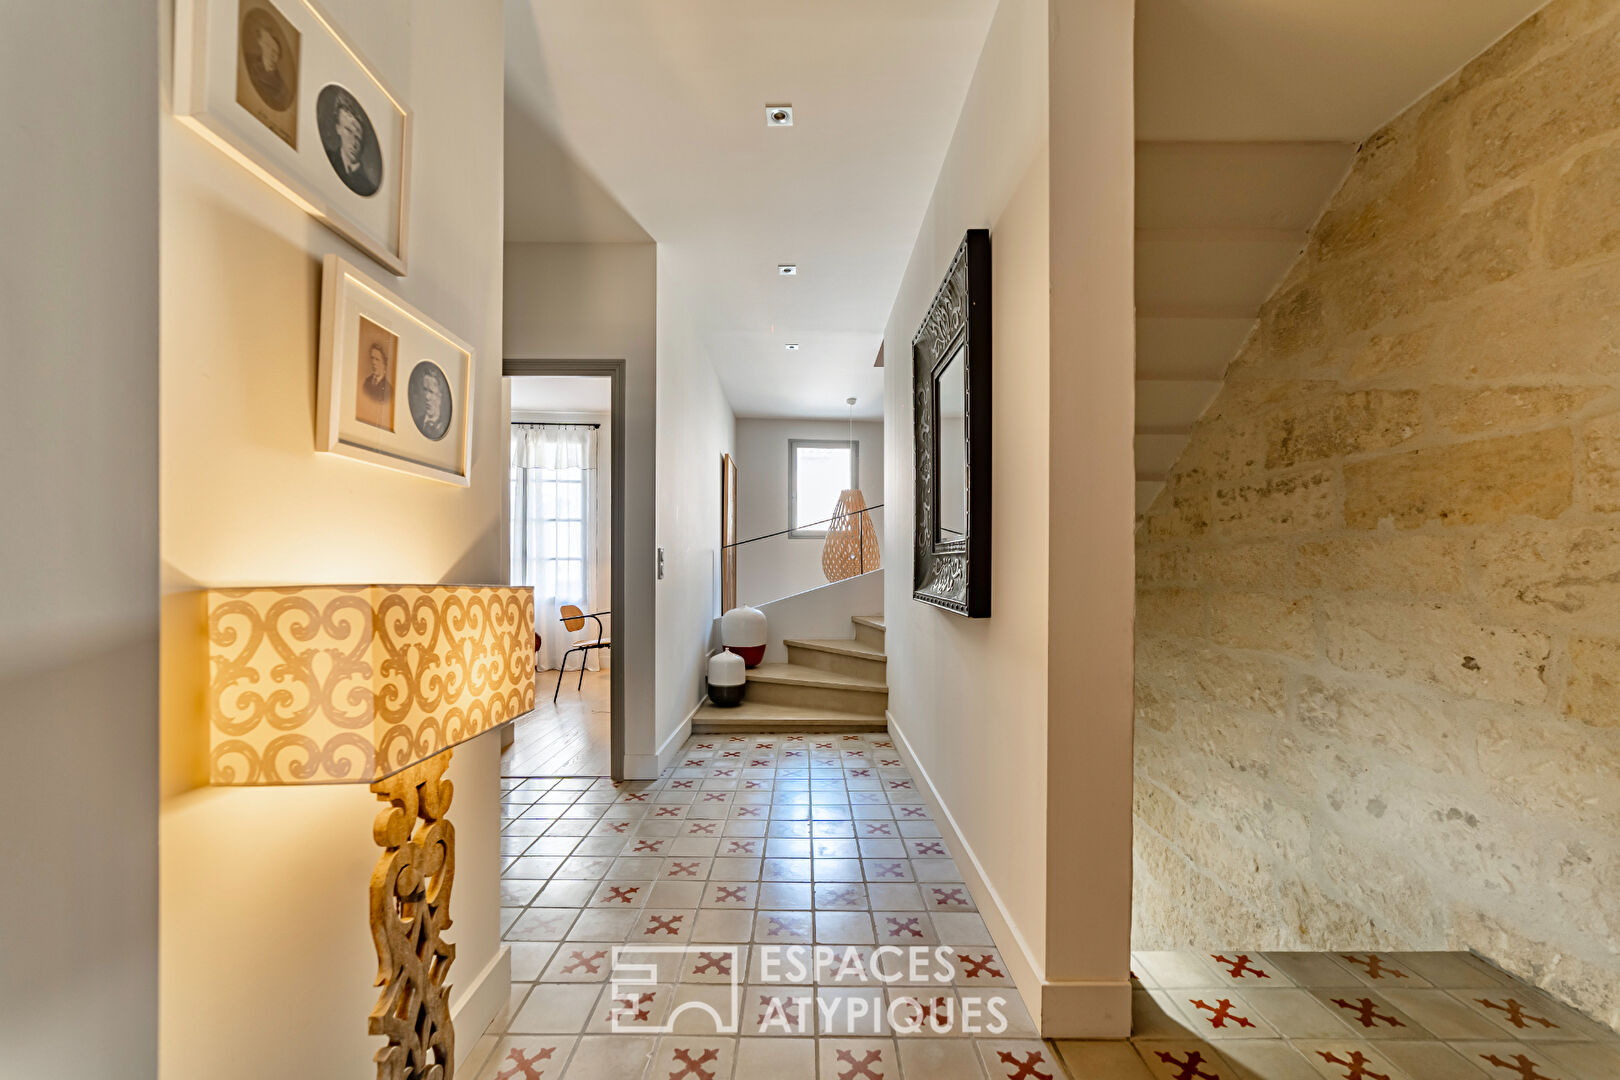 Superb renovation in the heart of the medieval city